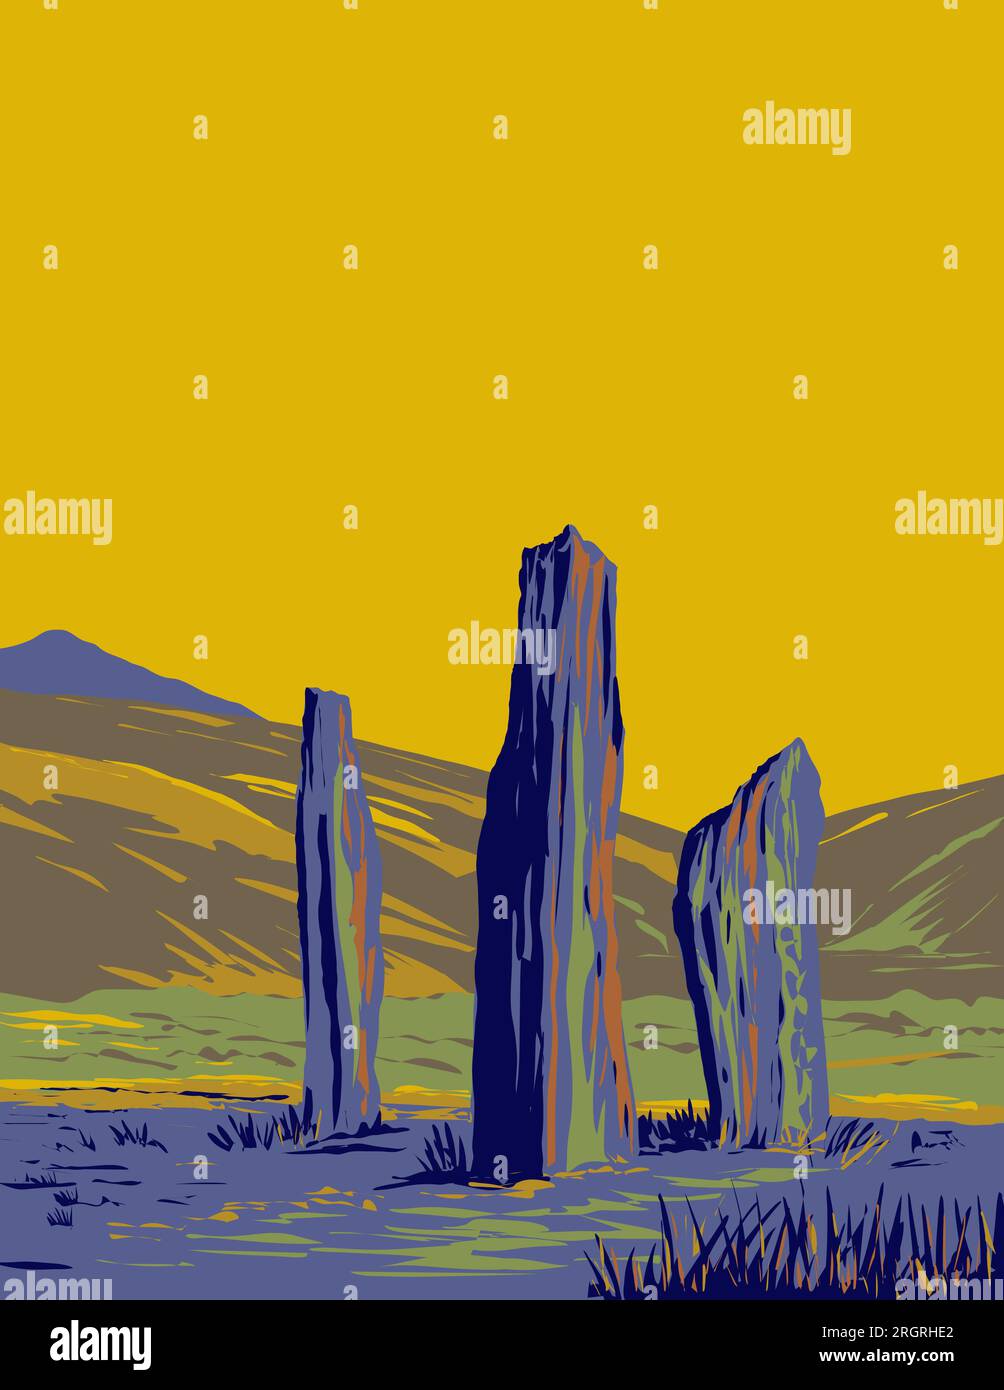 WPA poster art of the Standing Stones on Machrie Moor in the Isle of Arran in Scotland done in works project administration or federal art project sty Stock Photo